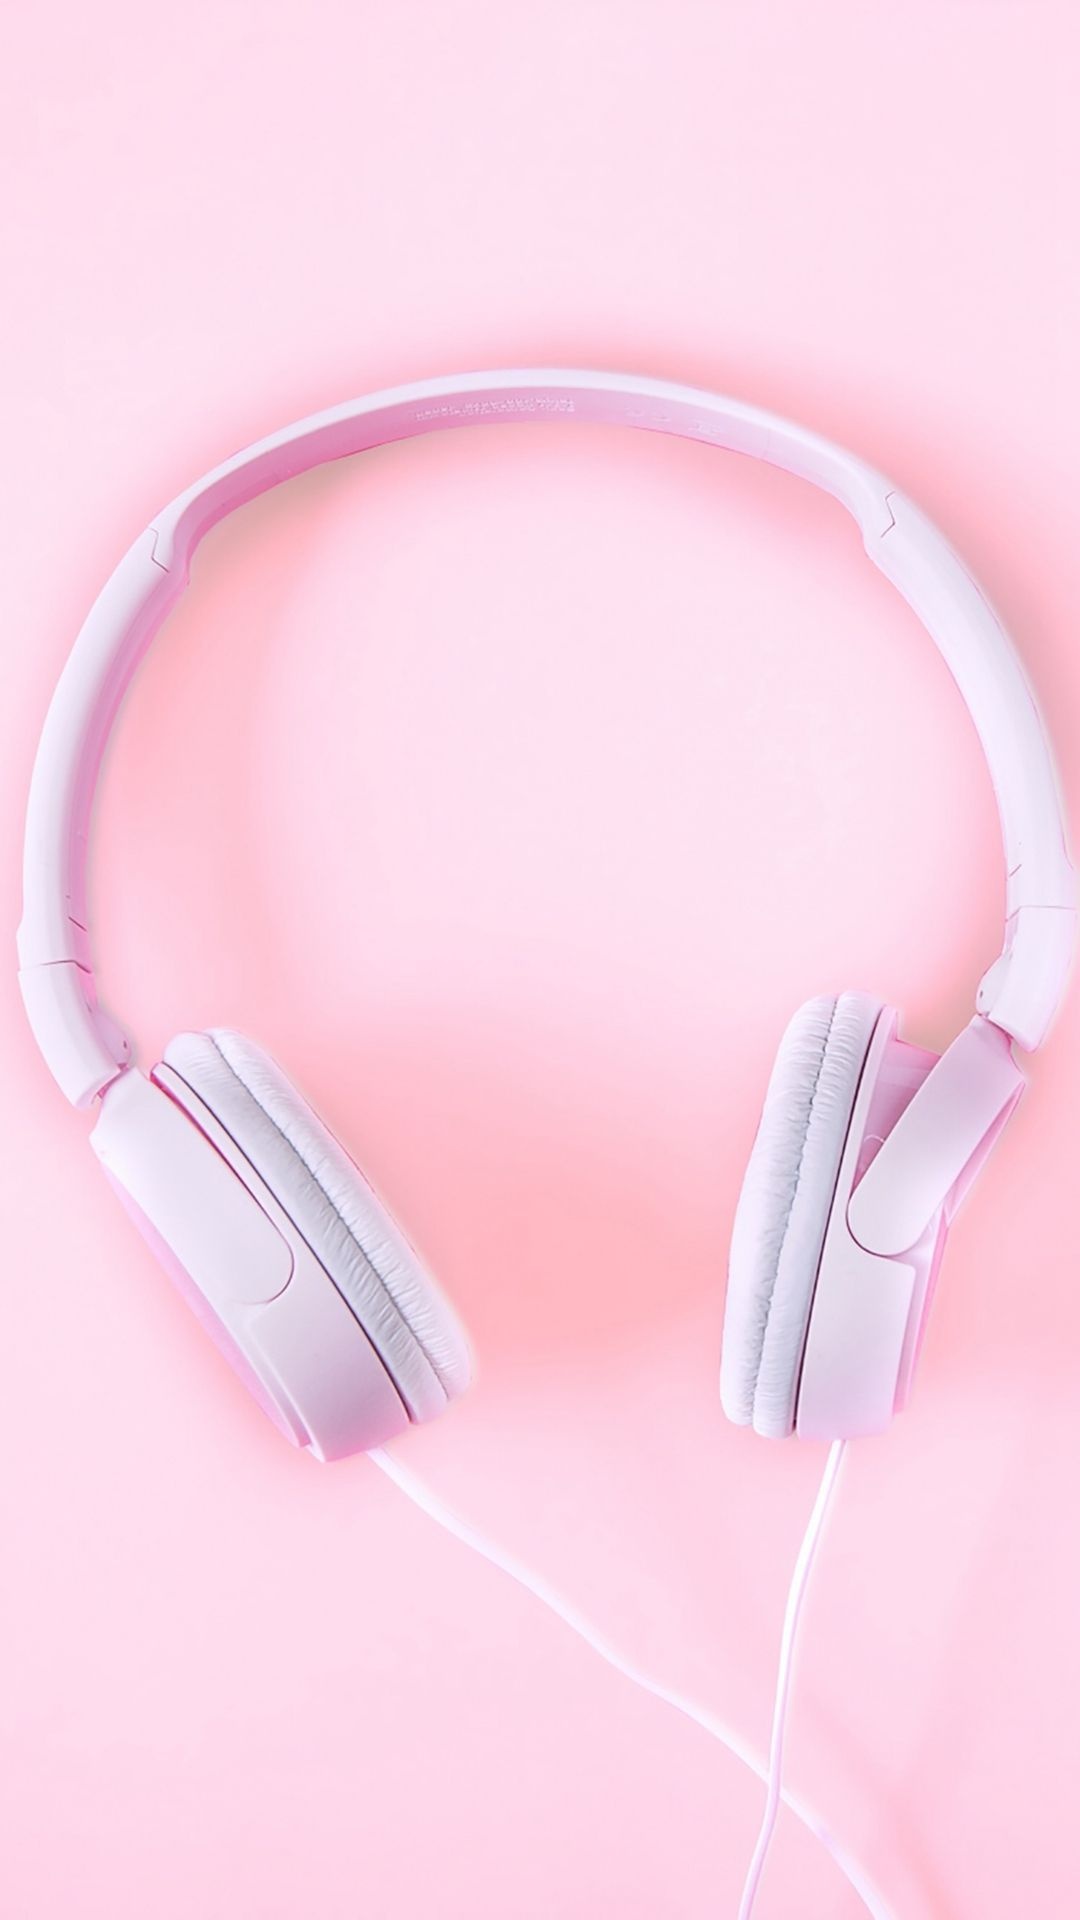 Pure fashion pink headphones, Stylish and trendy, iPhone 8 wallpapers, Fashion-forward accessory, 1080x1920 Full HD Handy